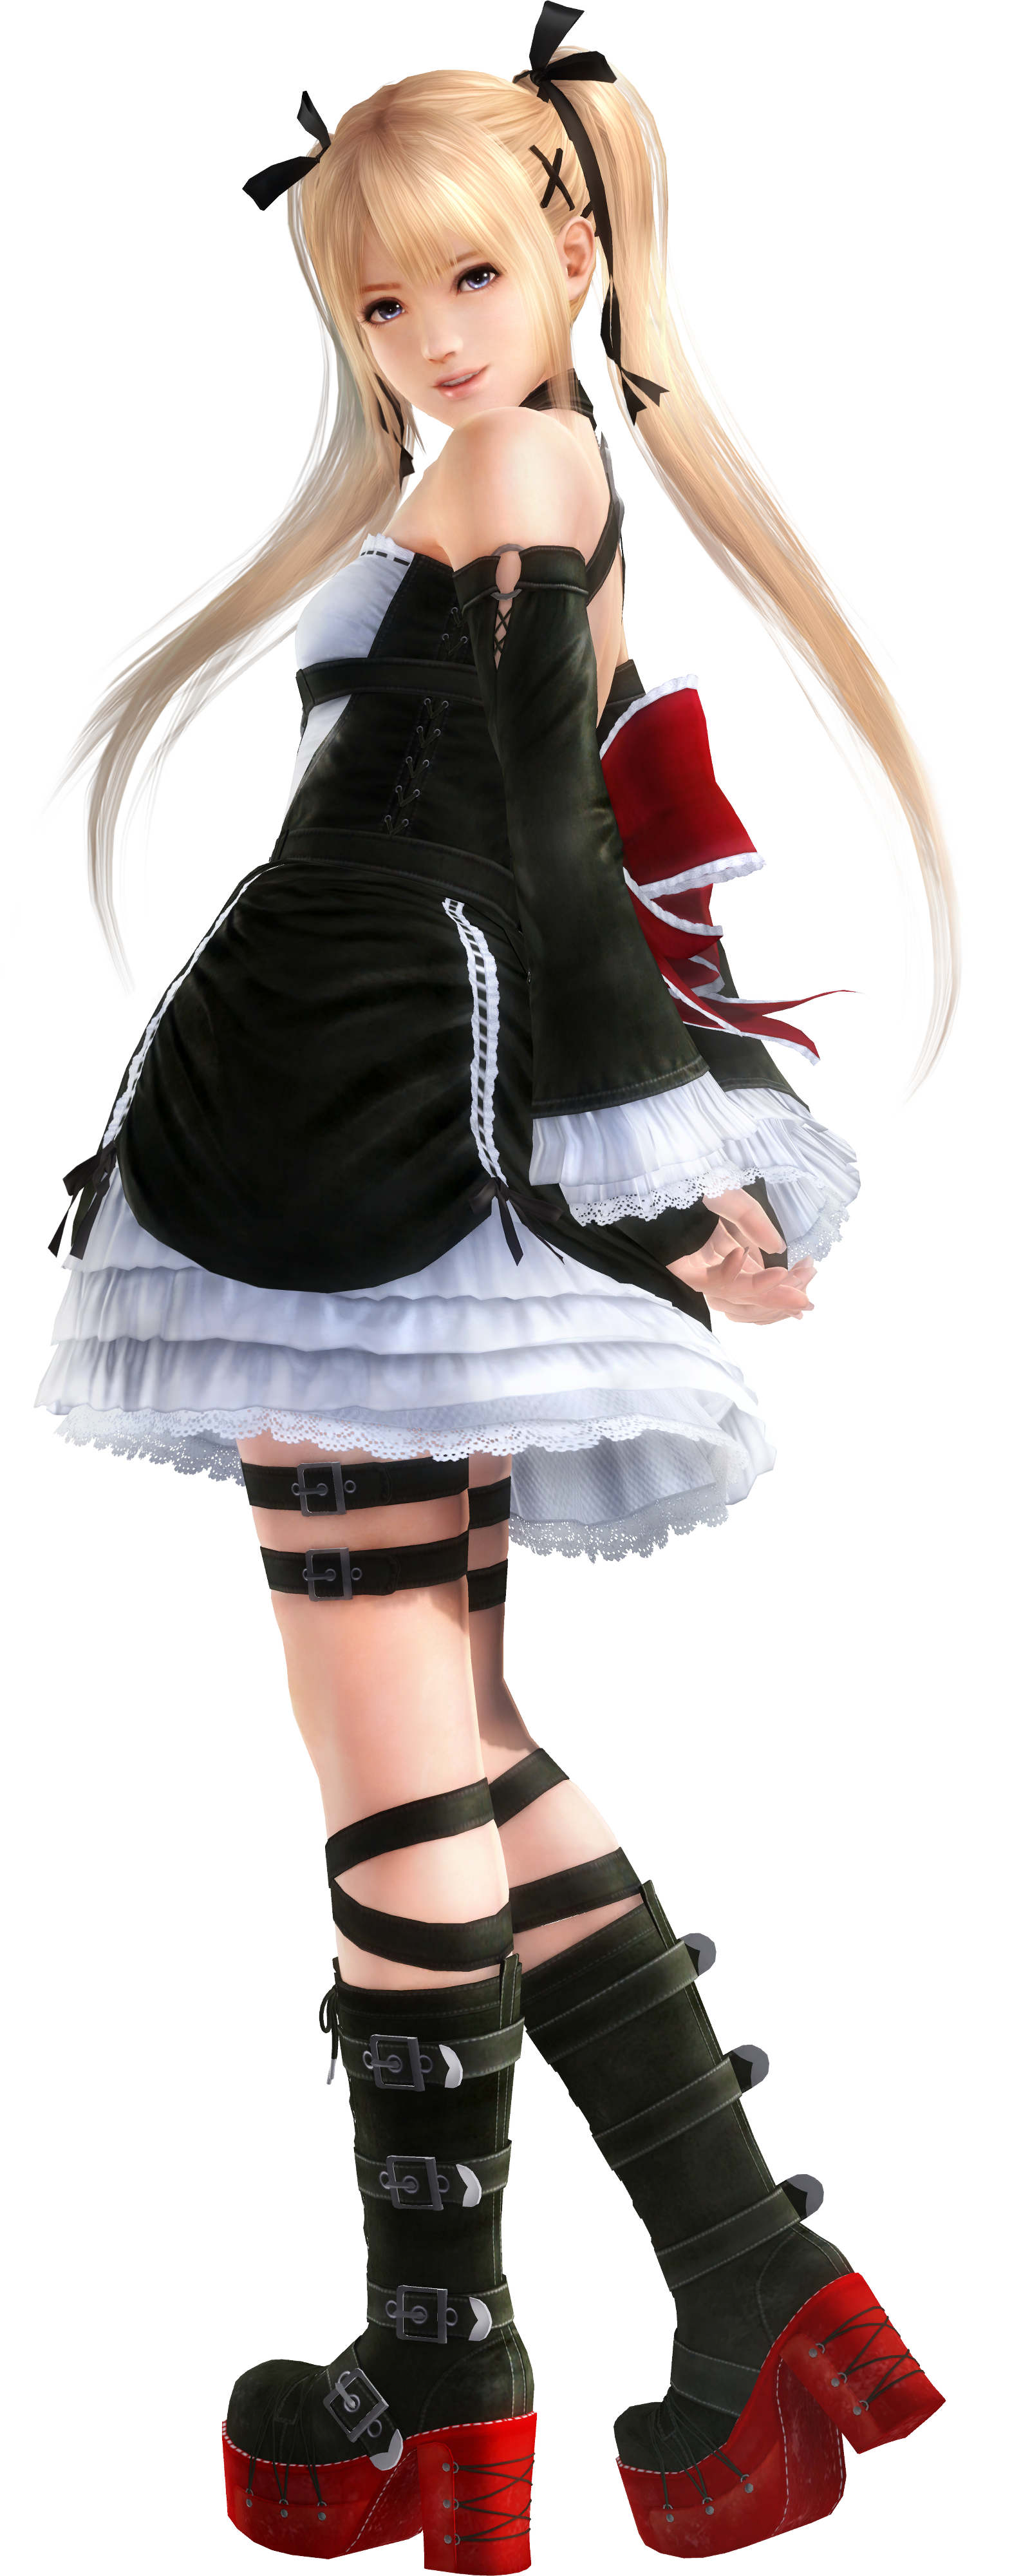 NEW Game Dead or Alive Marie Rose DOA Warm Sofa Sofa Bed Blanket 39" 59" 86" 